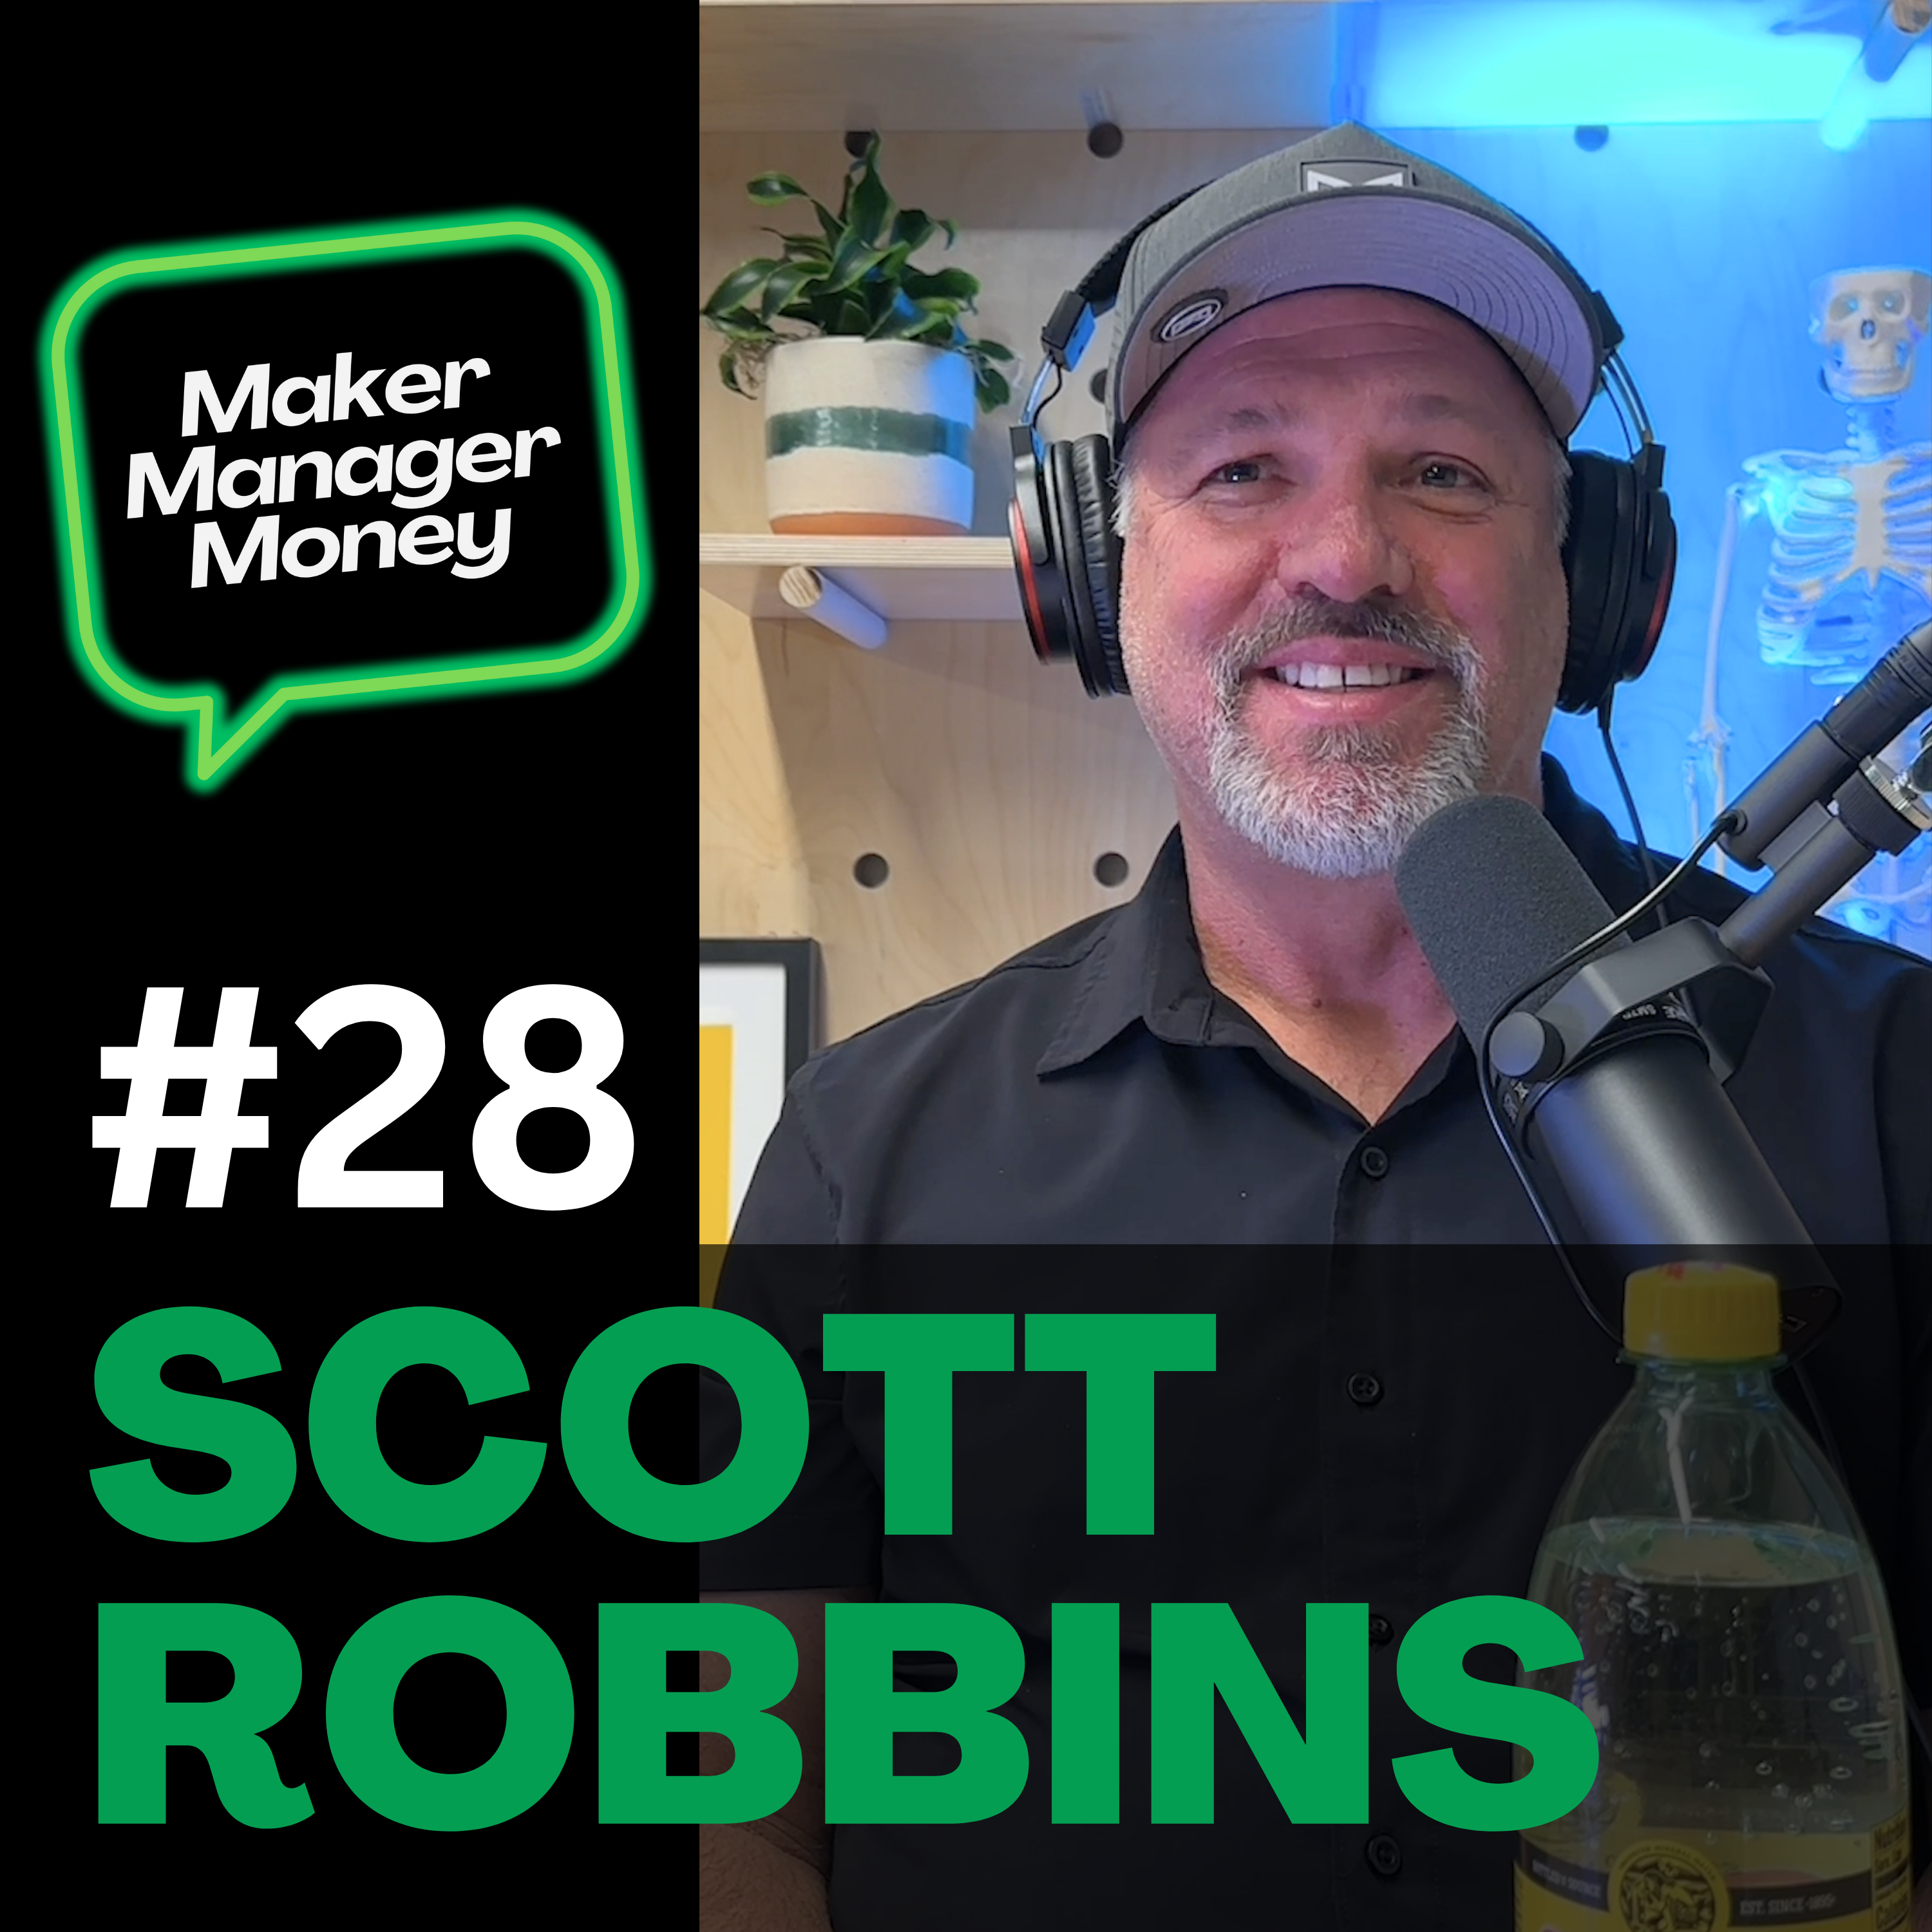 Scott Robbins – get off your butt and do it